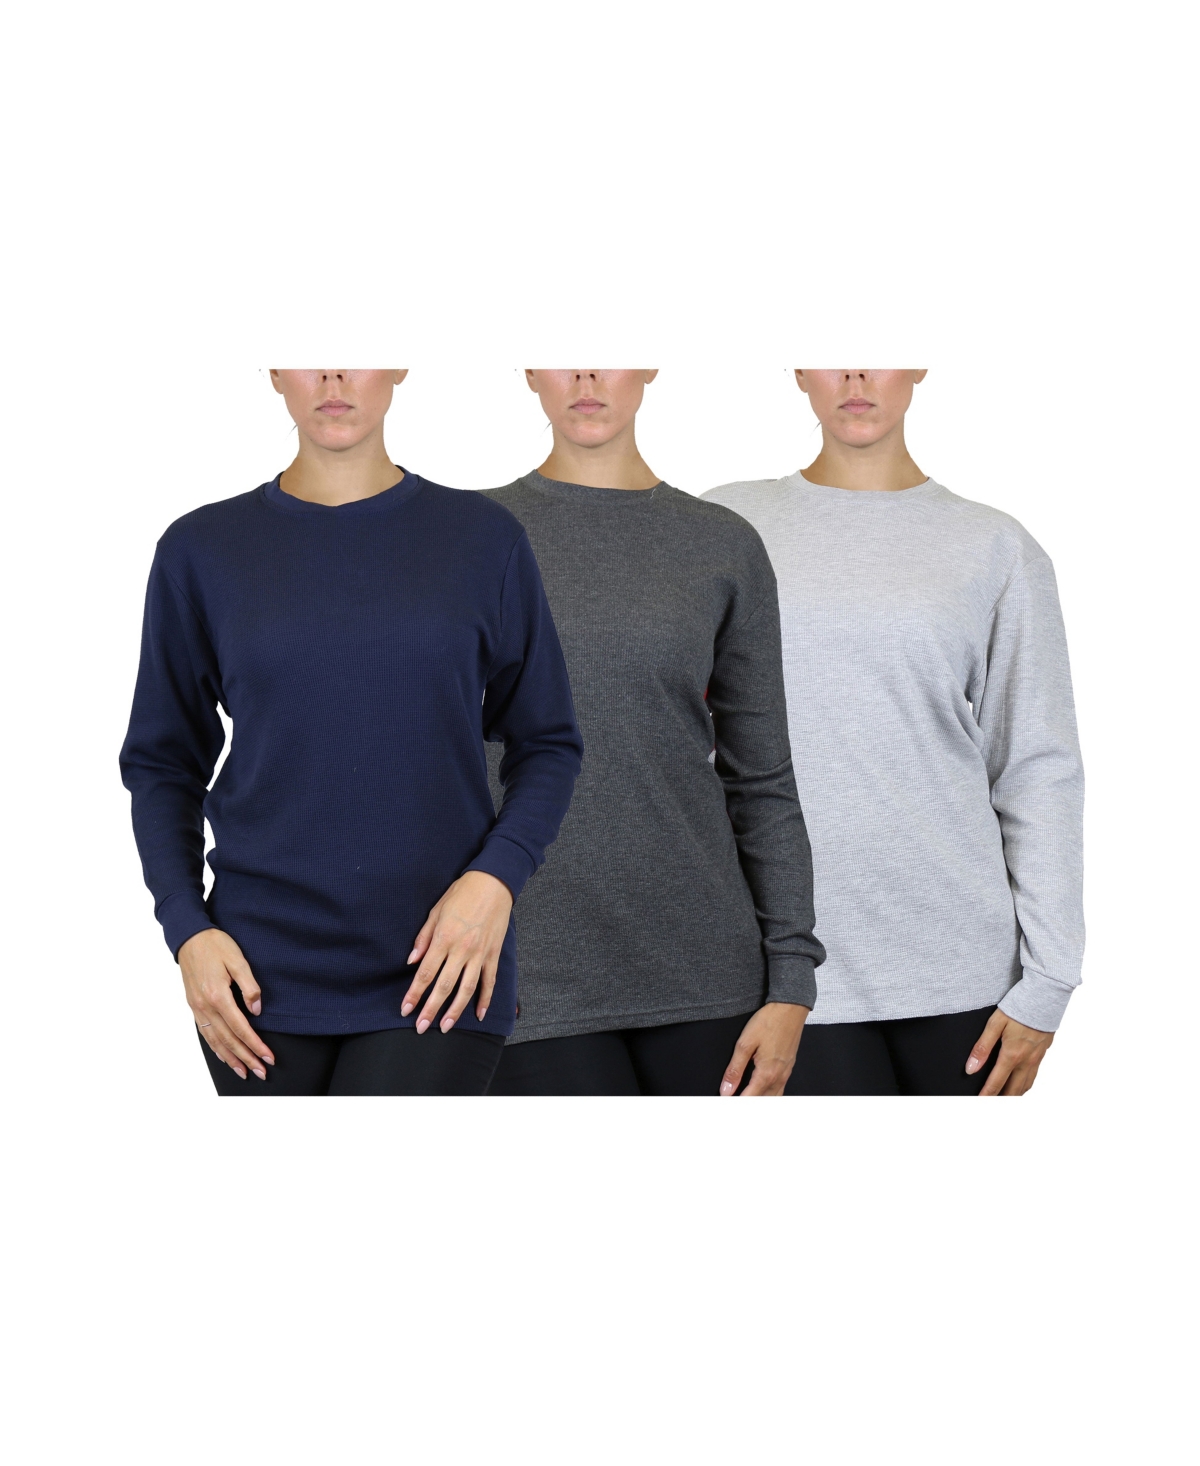 Shop Galaxy By Harvic Women's Loose Fit Waffle Knit Thermal Shirt, Pack Of 3 In Navy,charcoal,heather Gray